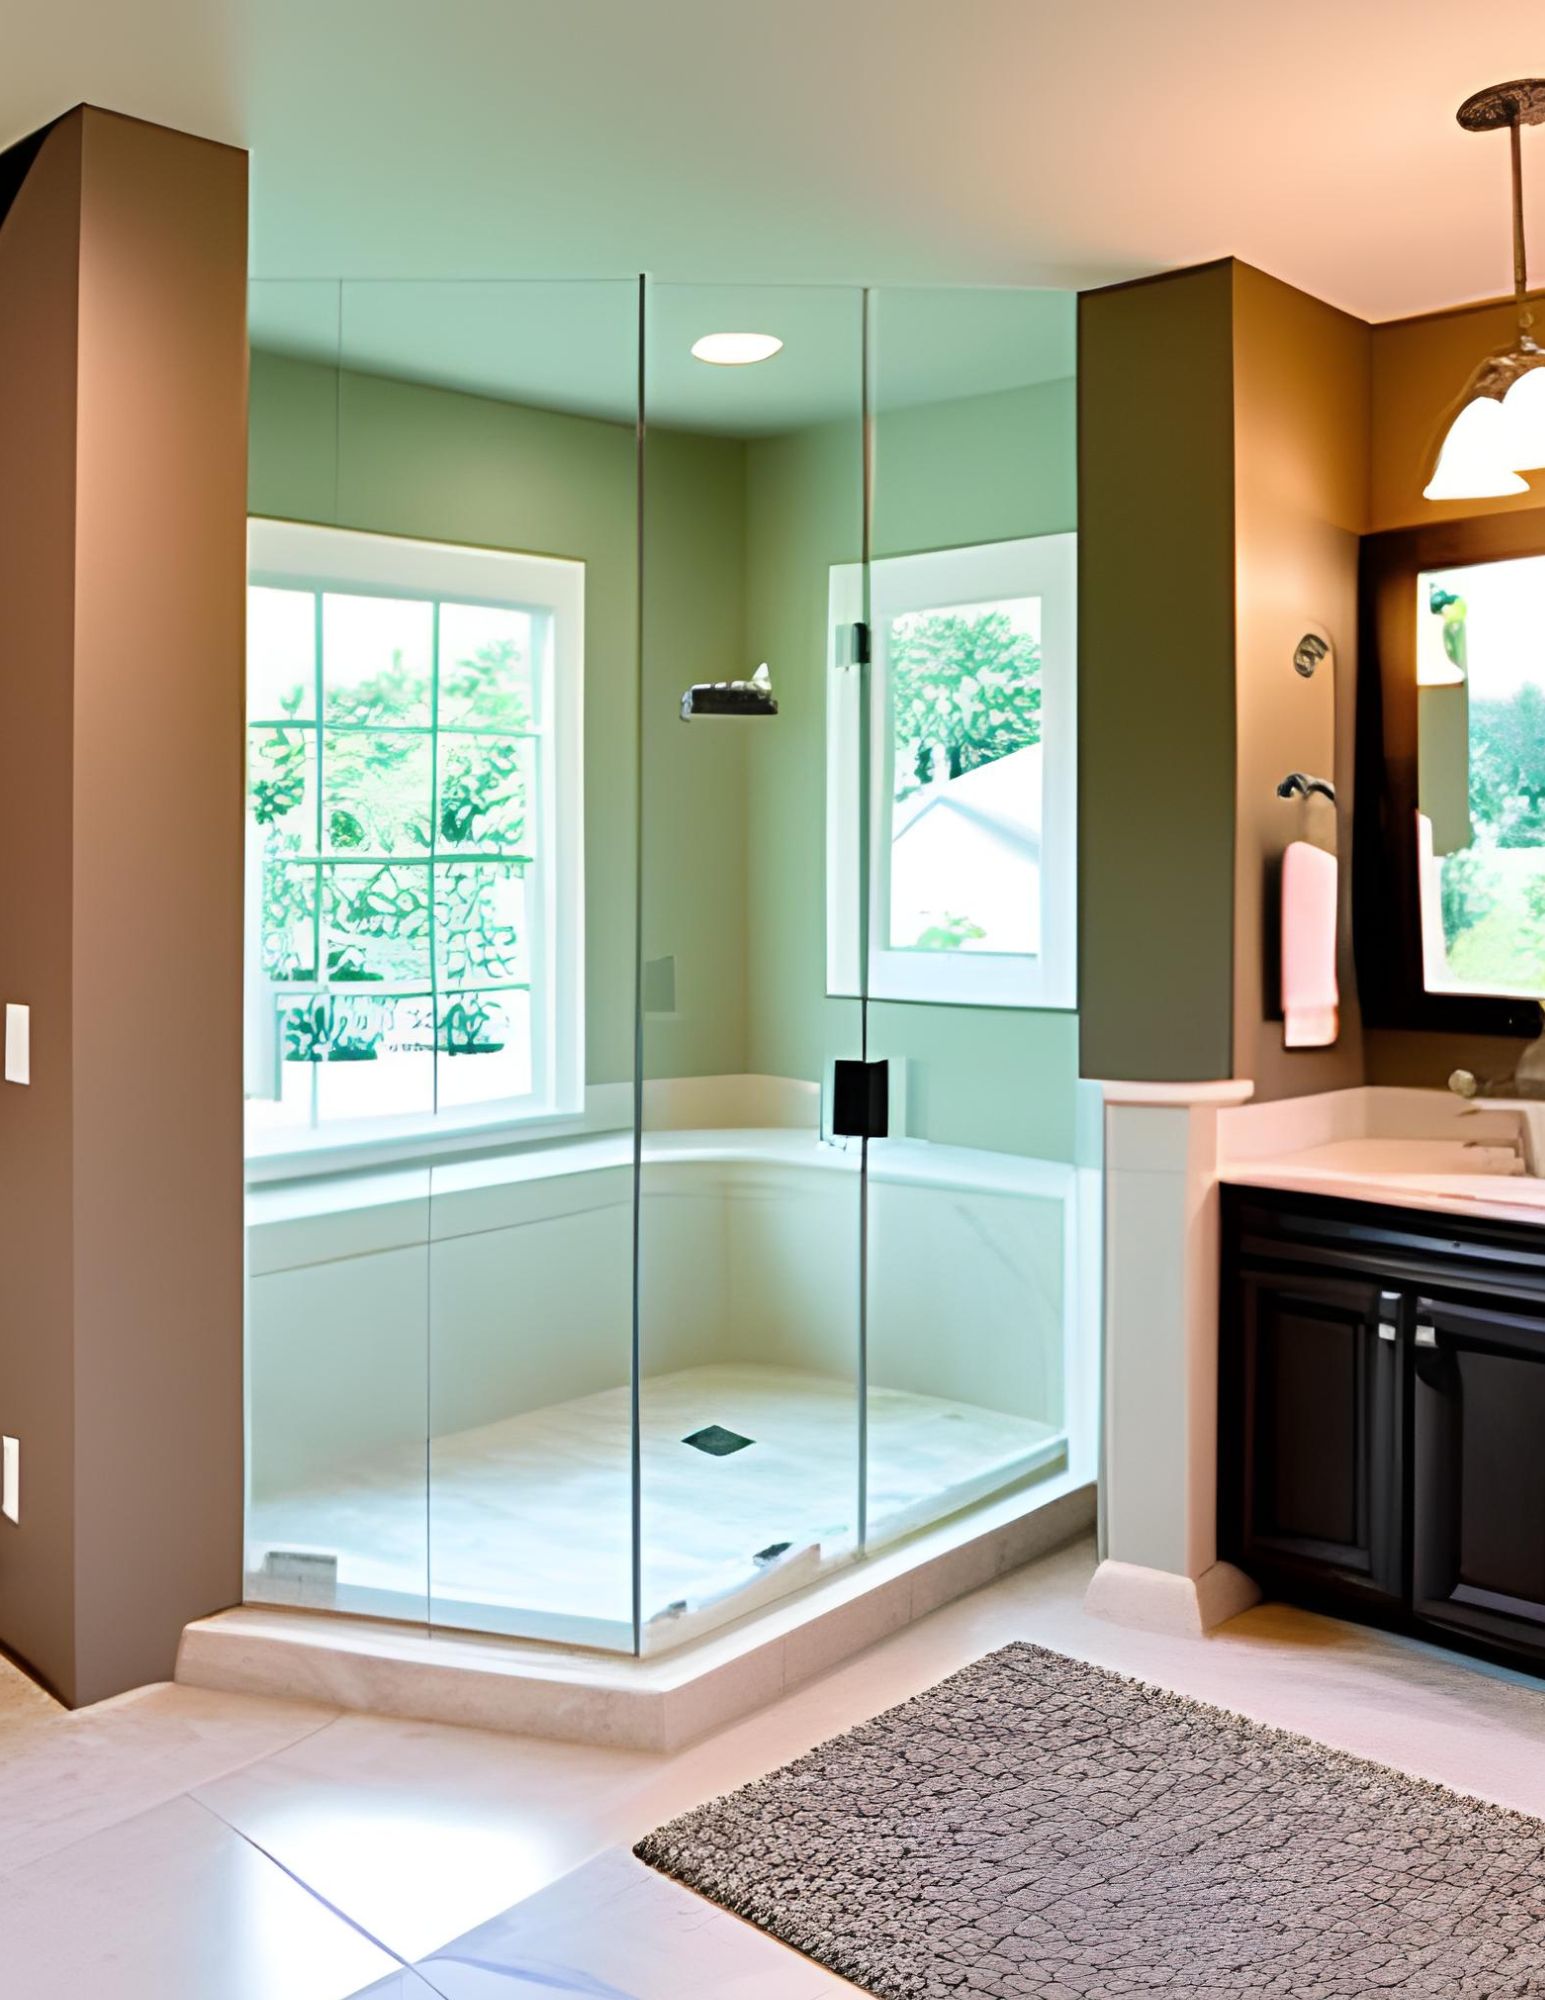 How much does it cost to remodel a bathroom?